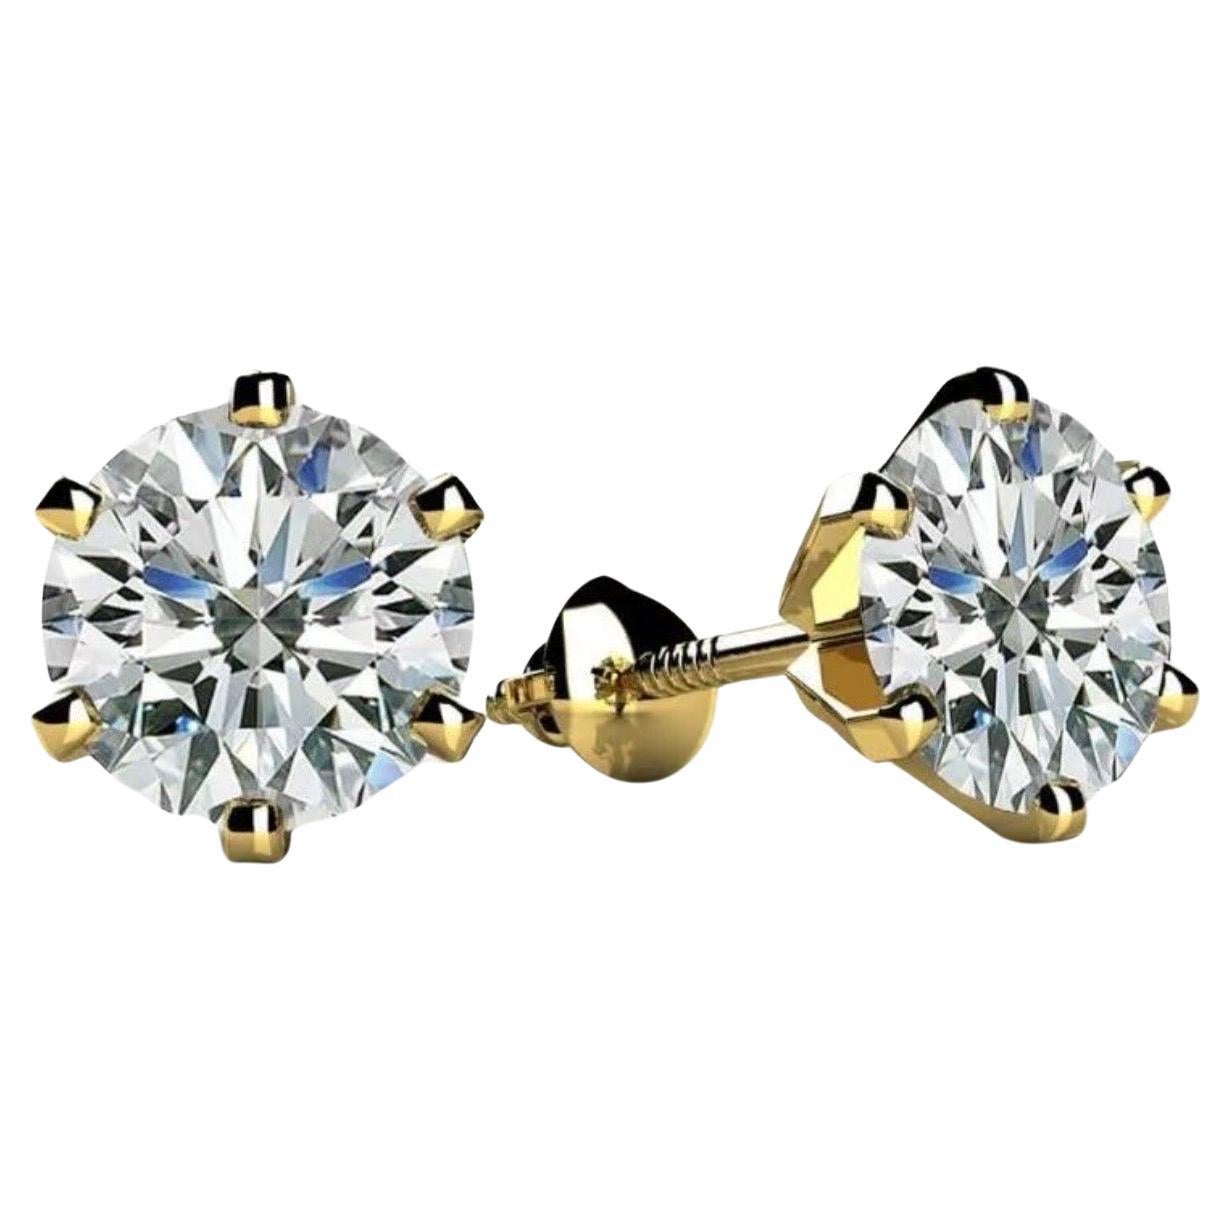 1.0 Carat Diamond Solitaire Stud Earrings 6 Prongs Screw Back 14 Kt Yellow Gold For Sale